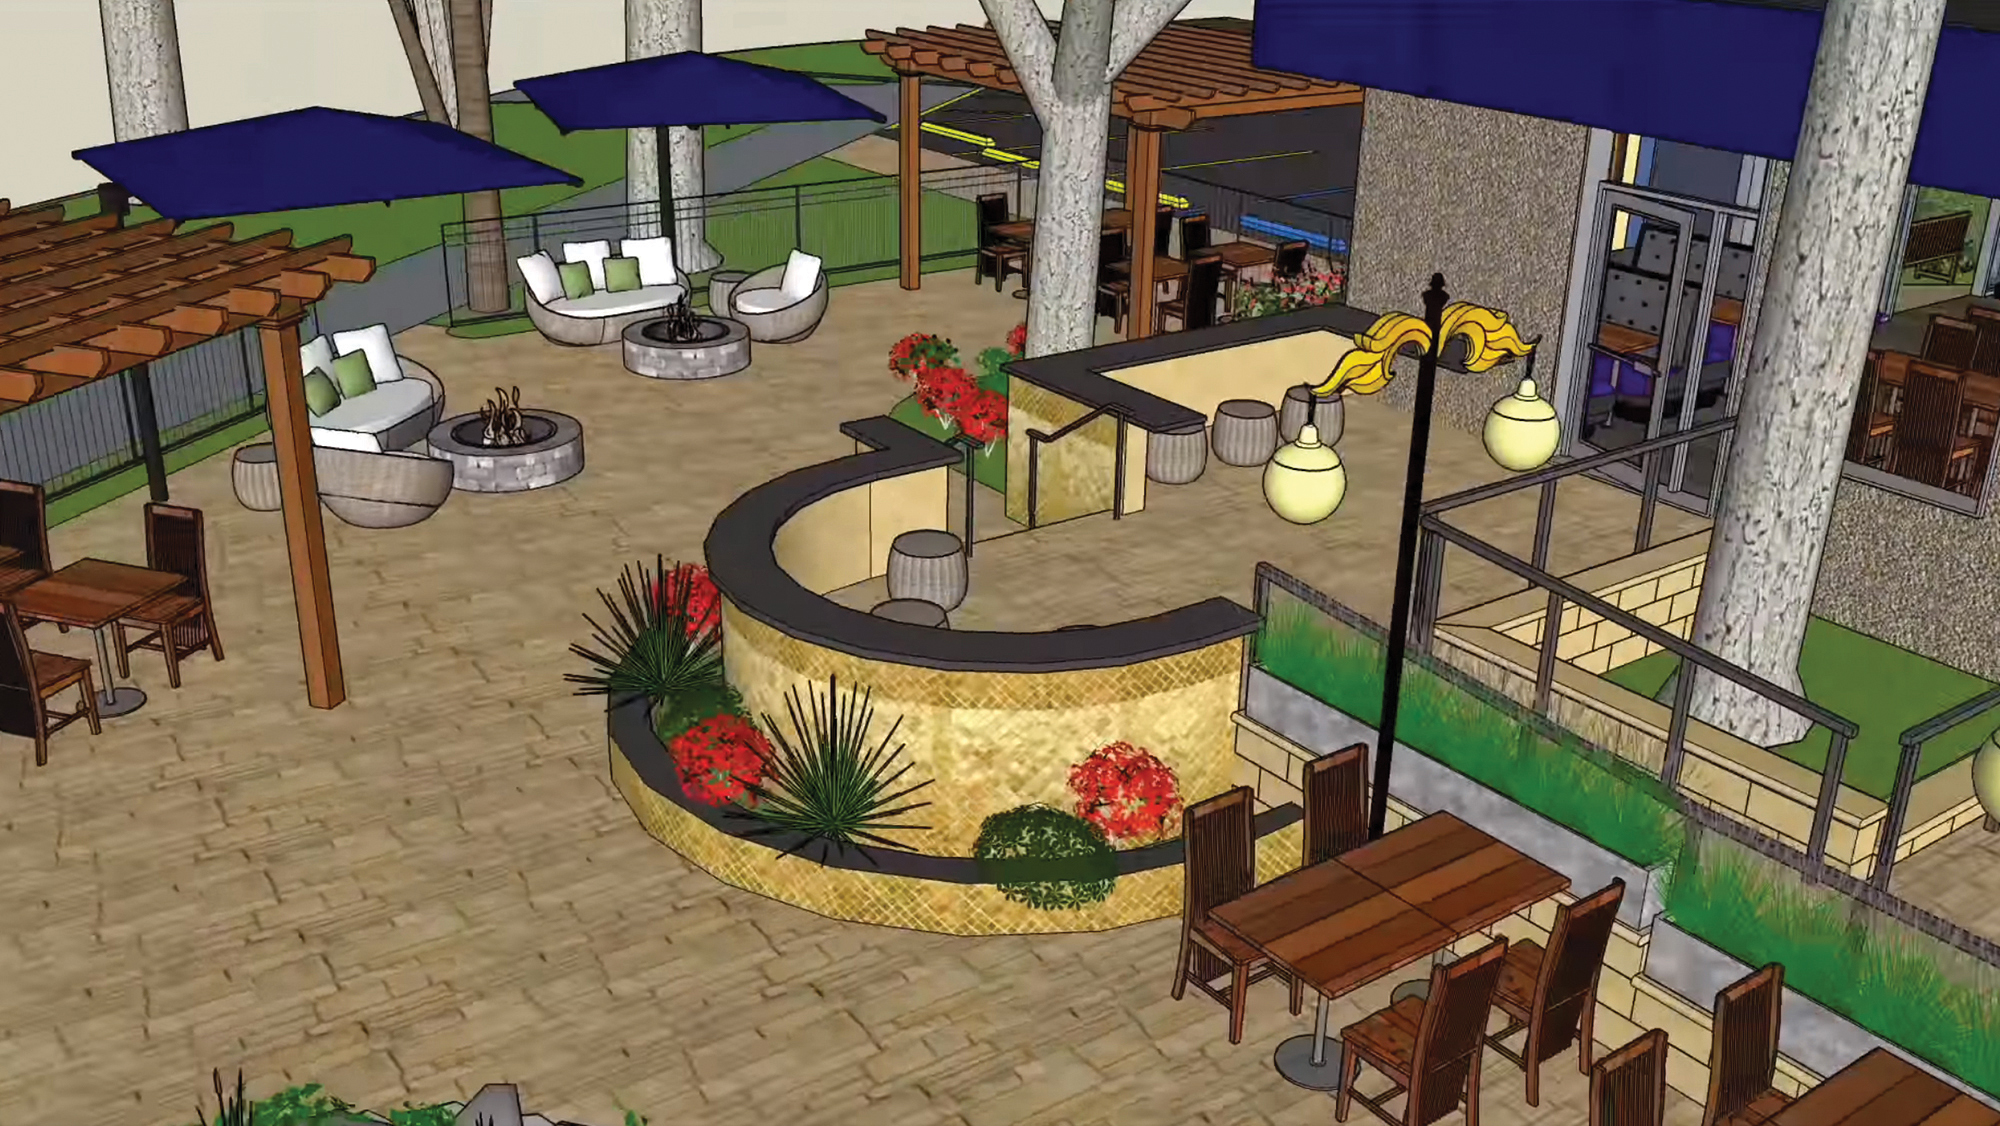 The Riverside Blue Orchid includes an outdoor patio area.